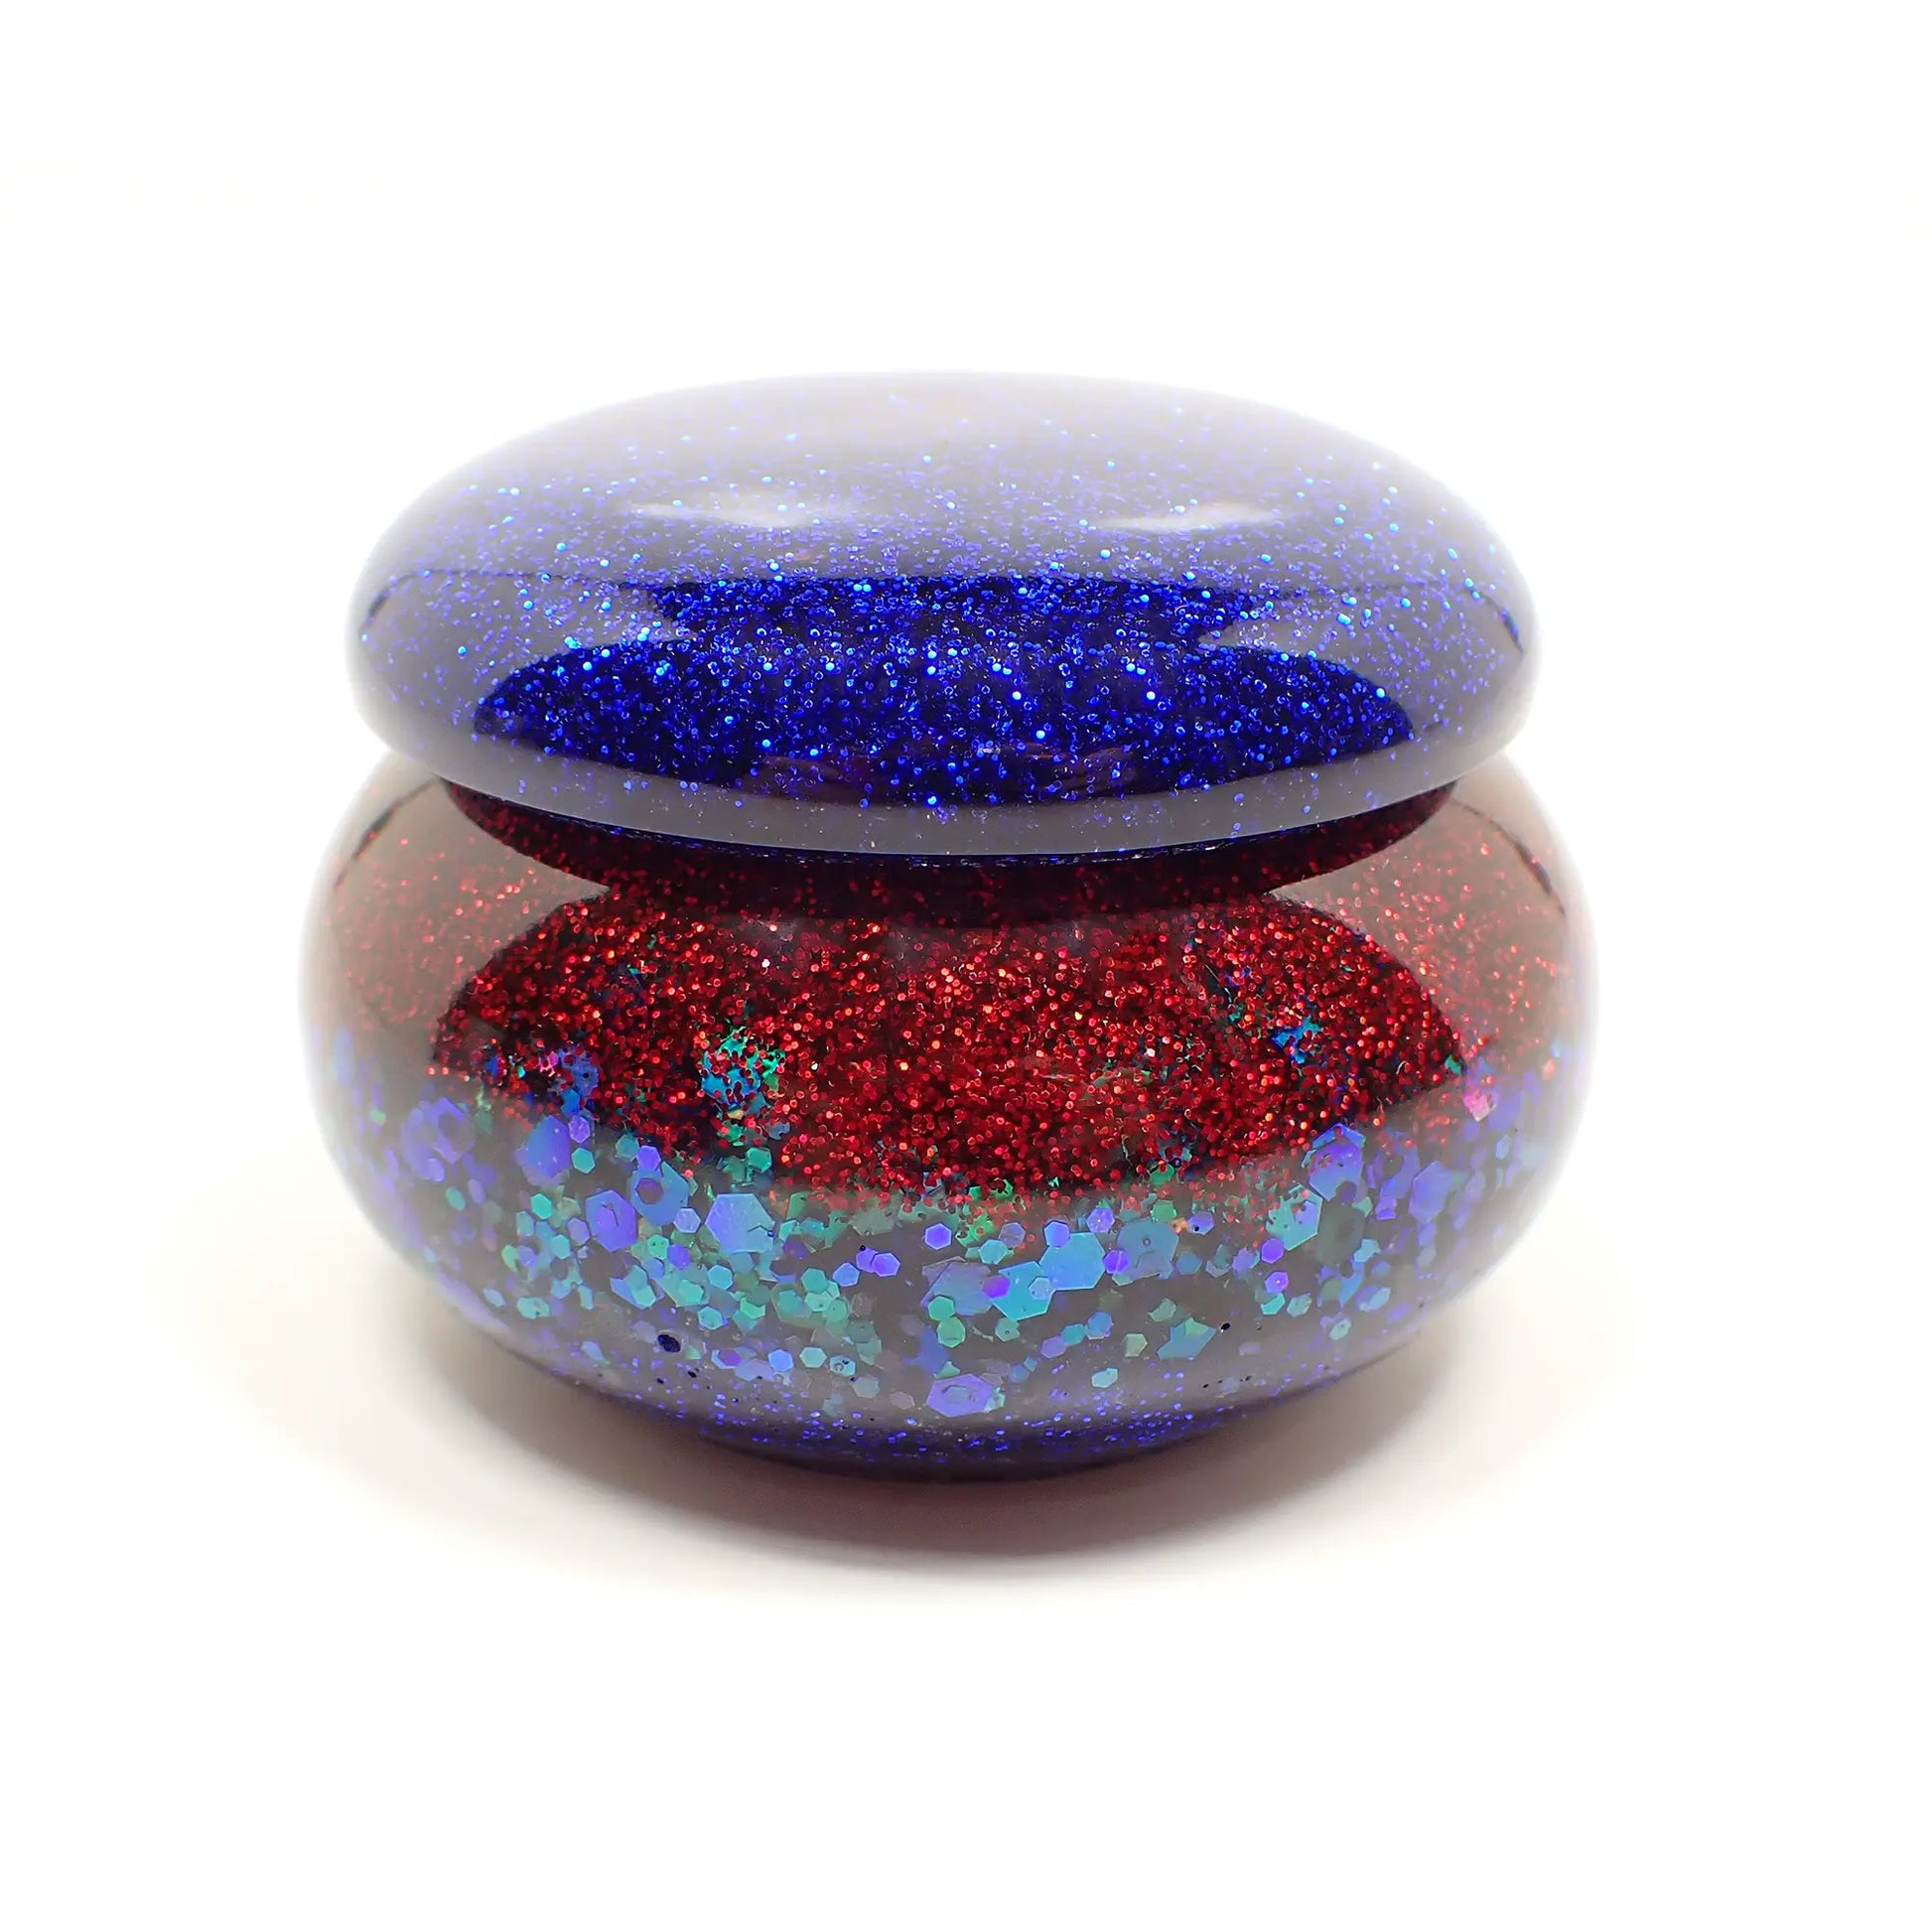 Side view of the handmade small resin trinket box. It has a short round jar like shape. The lid is pearly blue with blue glitter. The bottom part has a band of red with red glitter, a band of chunky iridescent green glitter, and then a small band of blue with blue glitter at the bottom. Very sparkly.